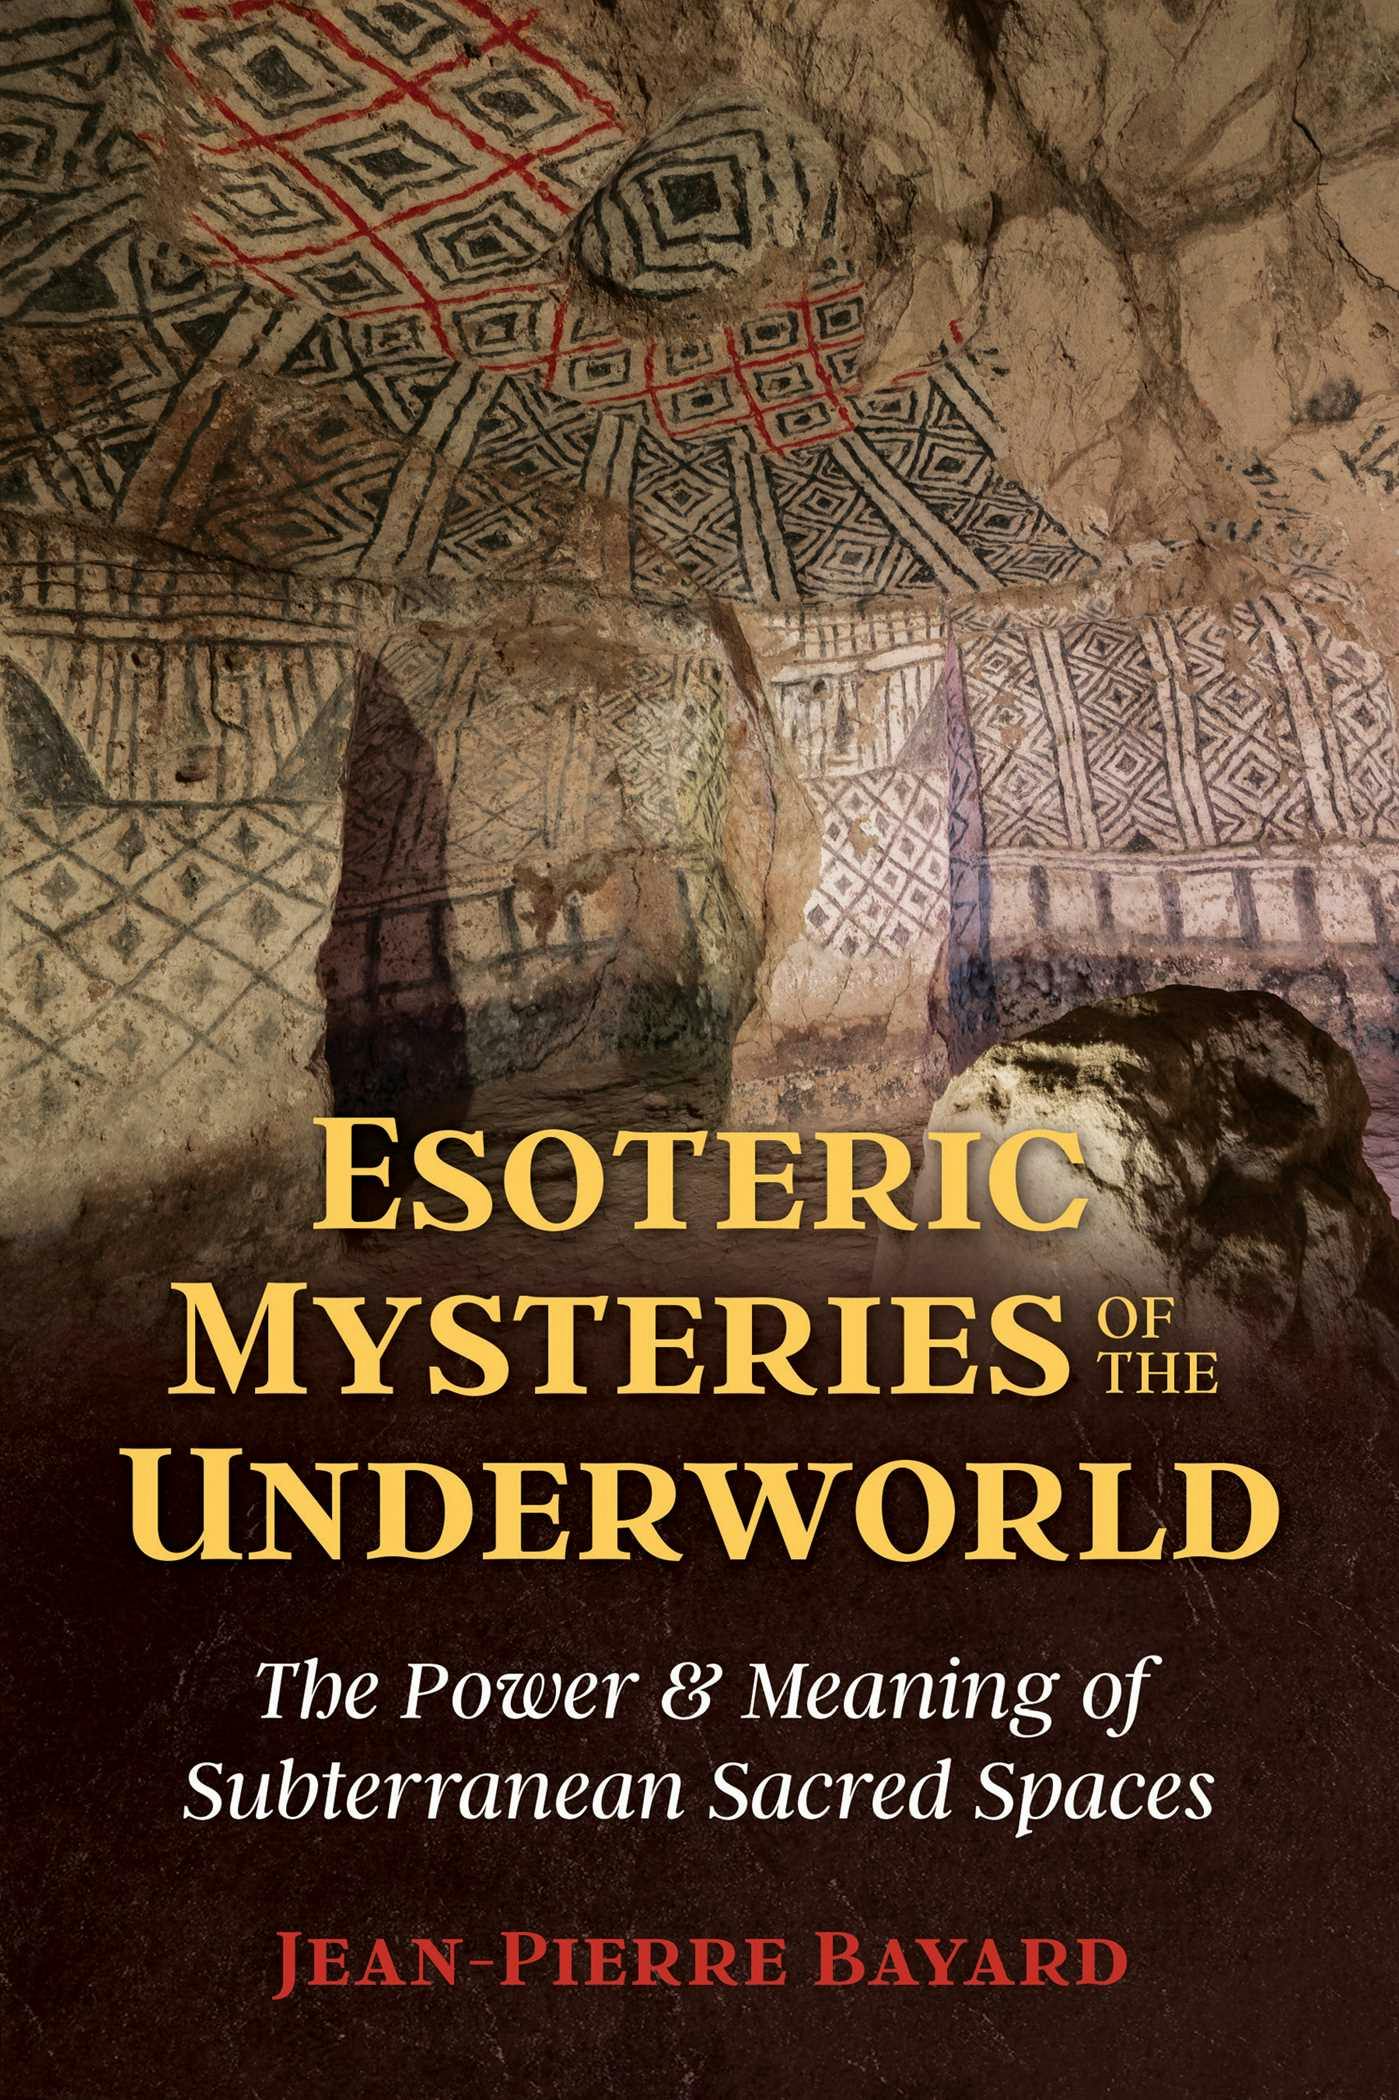 Esoteric Mysteries of the Underworld: The Power and Meaning of Subterranean Sacred Spaces - Jean-Pierre Bayard